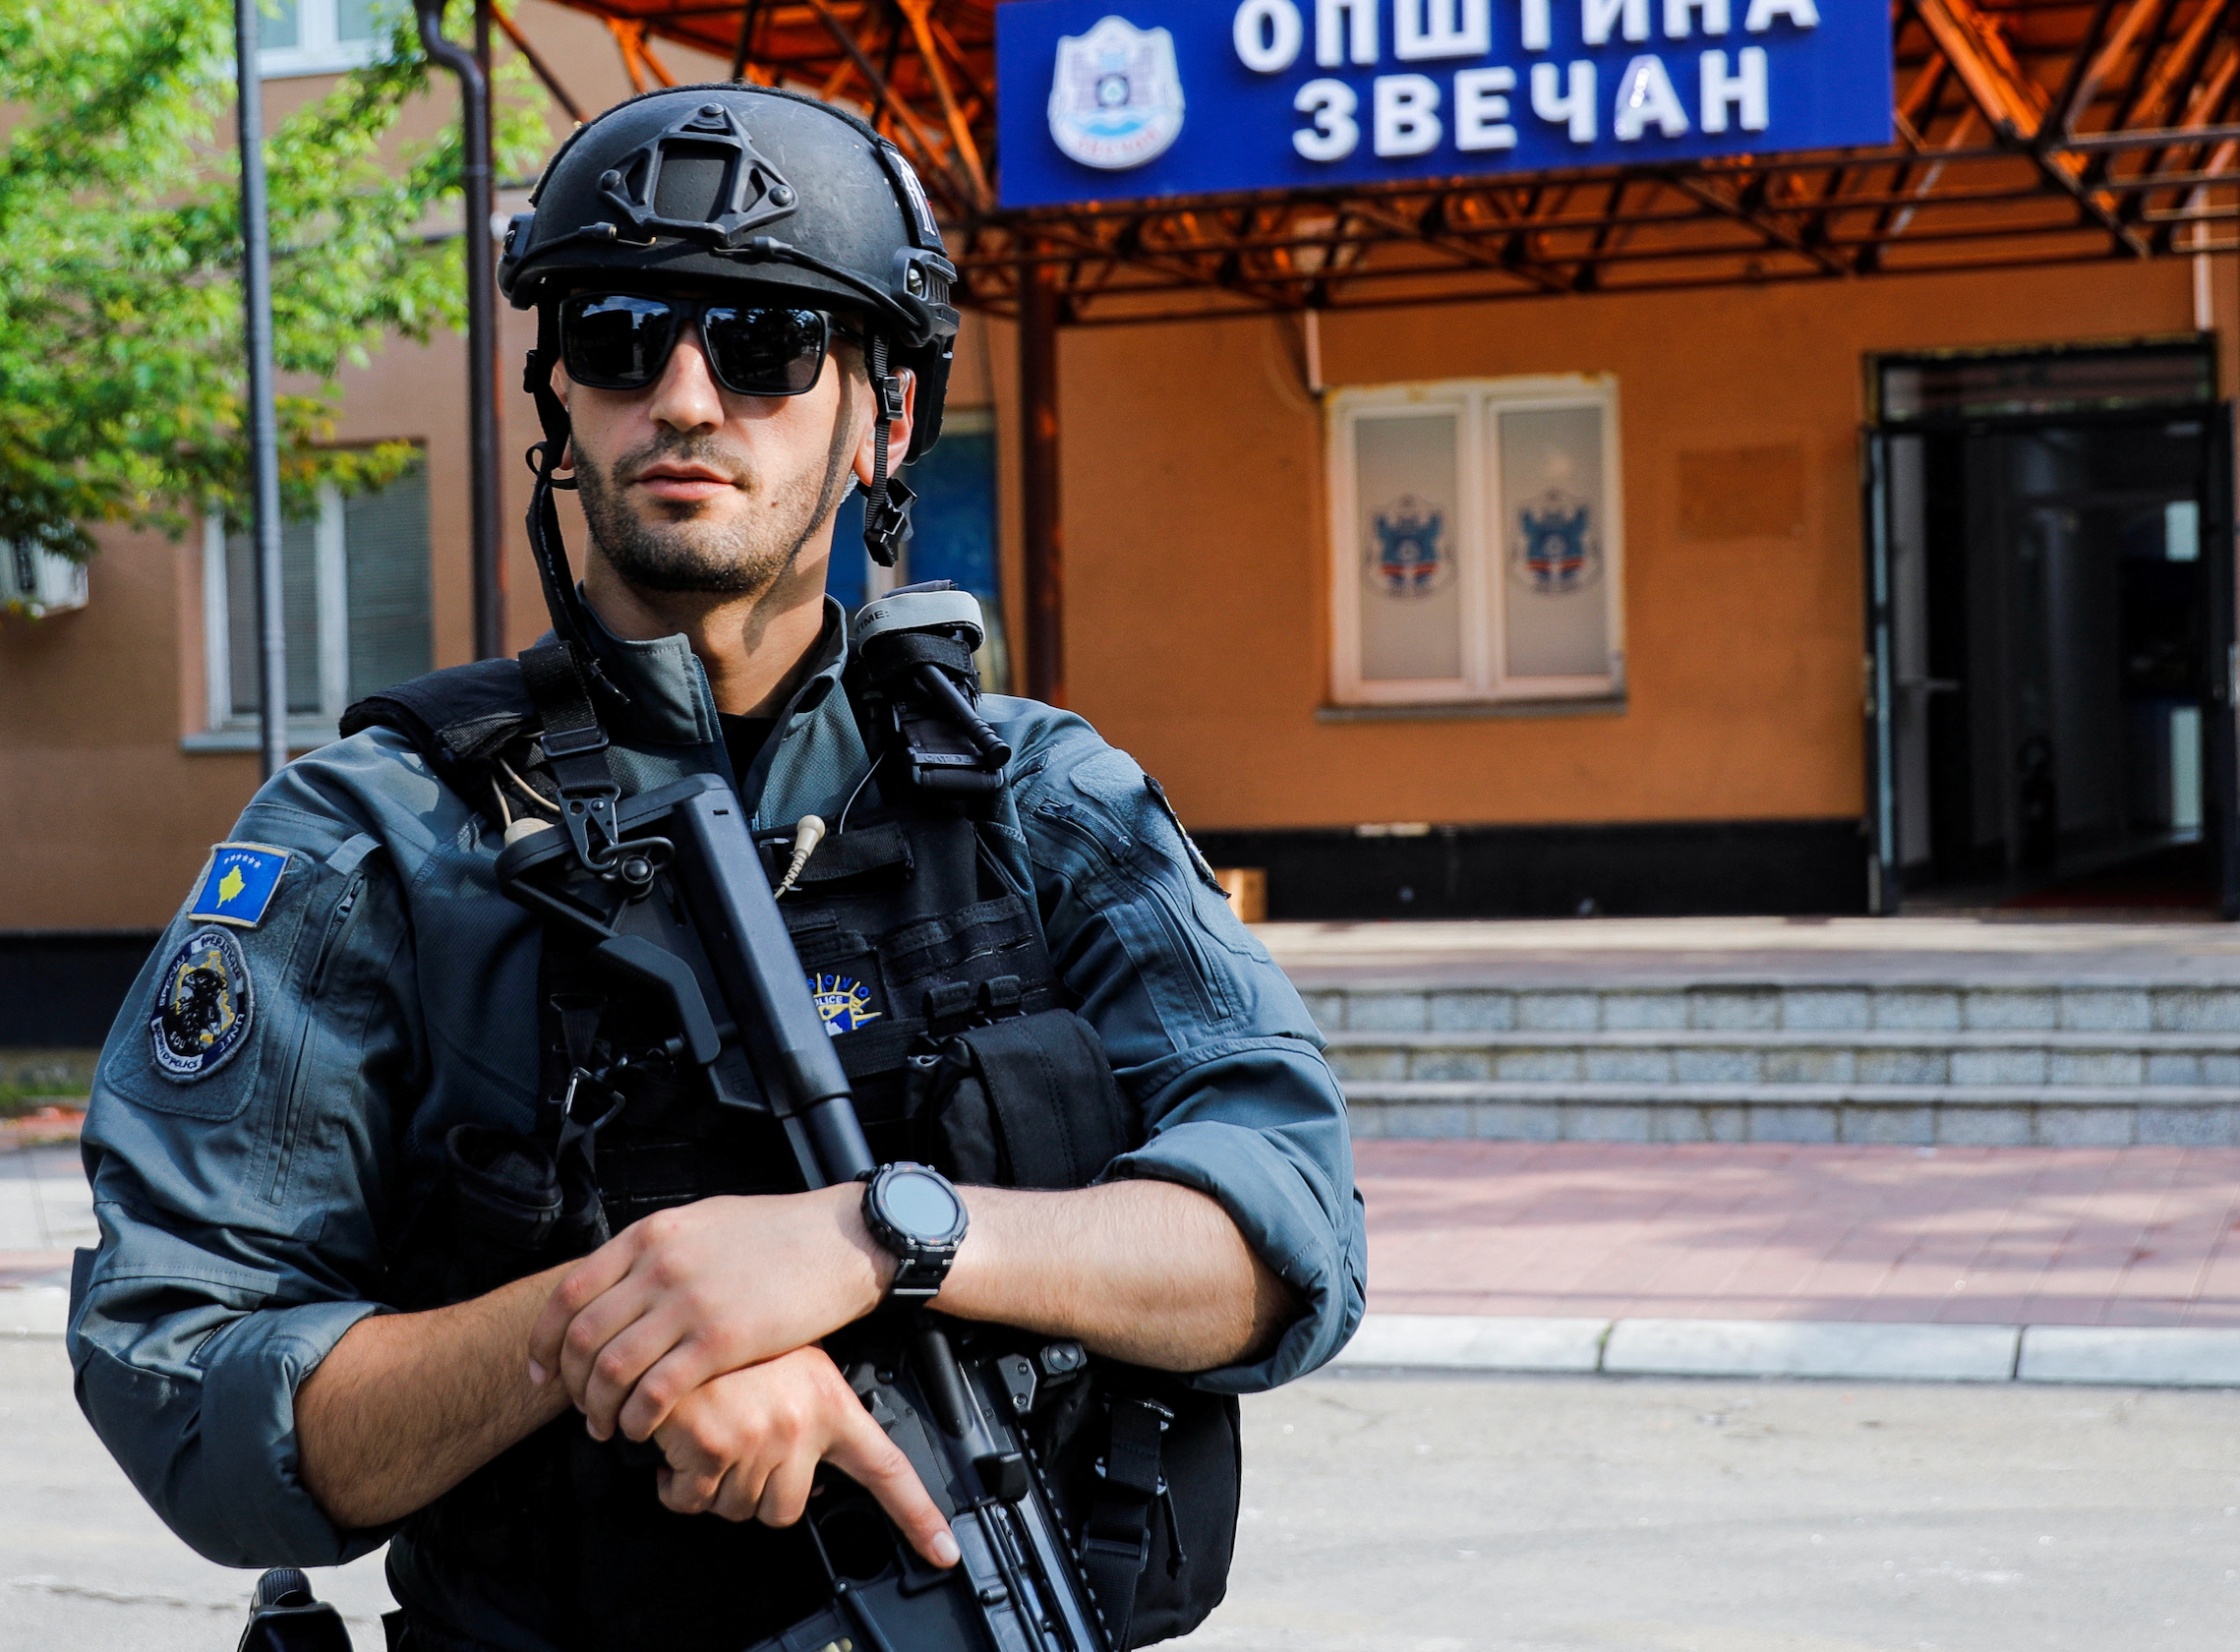 A member of Kosovo special police forces guards the municipal offices in Zvecan after ethnic Serb protestors tried to prevent a newly-elected ethnic Albanian mayor from entering the office in Zvecan, Kosovo